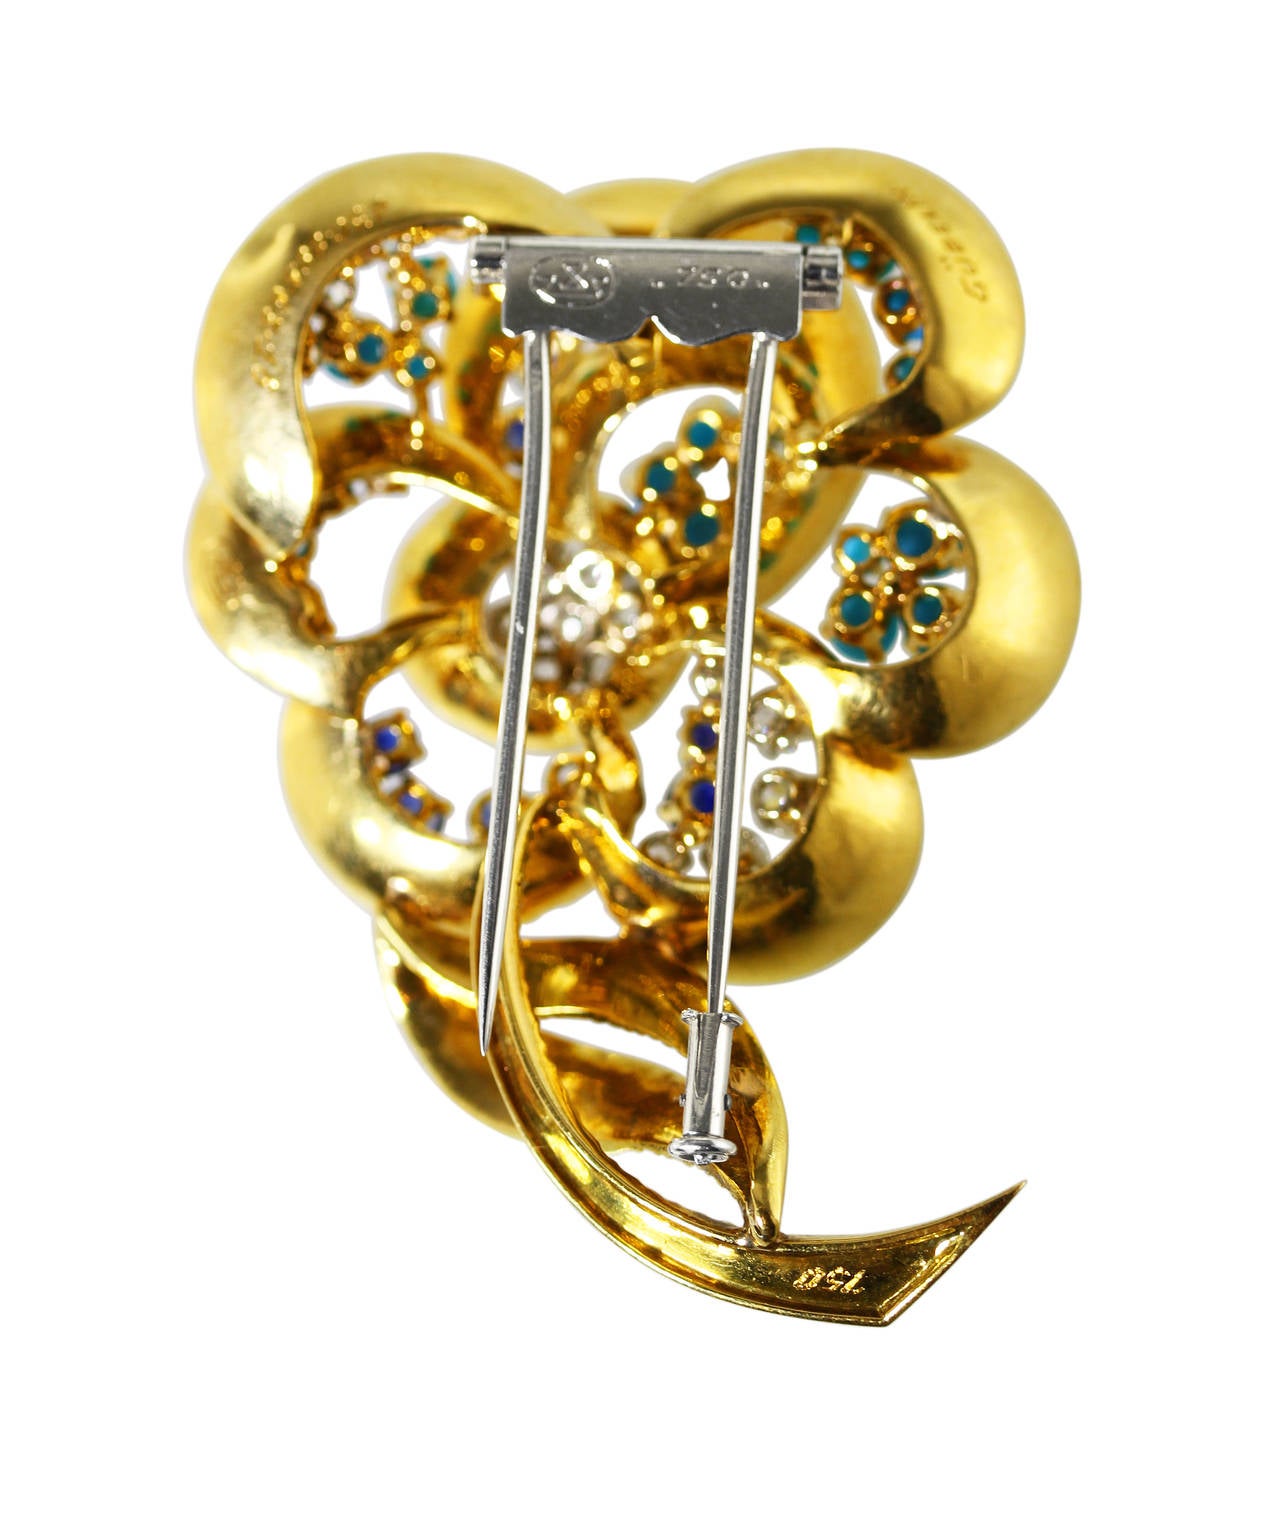 An 18 karat yellow gold, turquoise, sapphire and diamond flower brooch by Gubelin, the stylized flower set with 20 turquoise cabochons, 10 round sapphires weighing approximately 2.00 carats, and 16 round diamonds weighing approximately 1.60 carats,